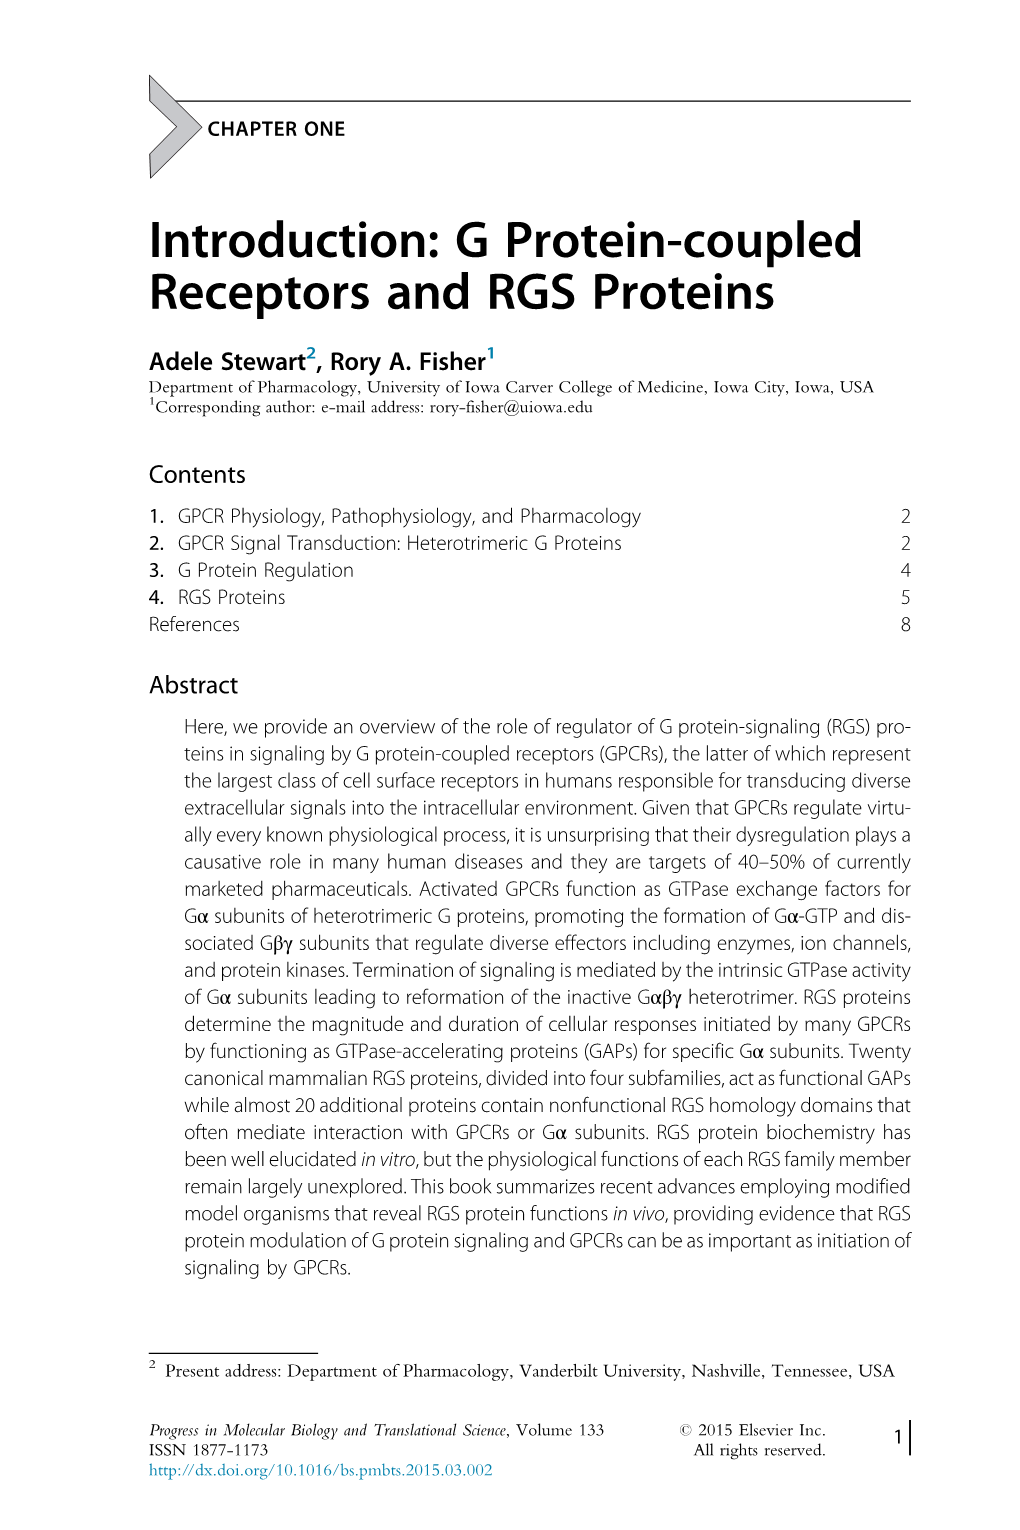 G Protein-Coupled Receptors and RGS Proteins